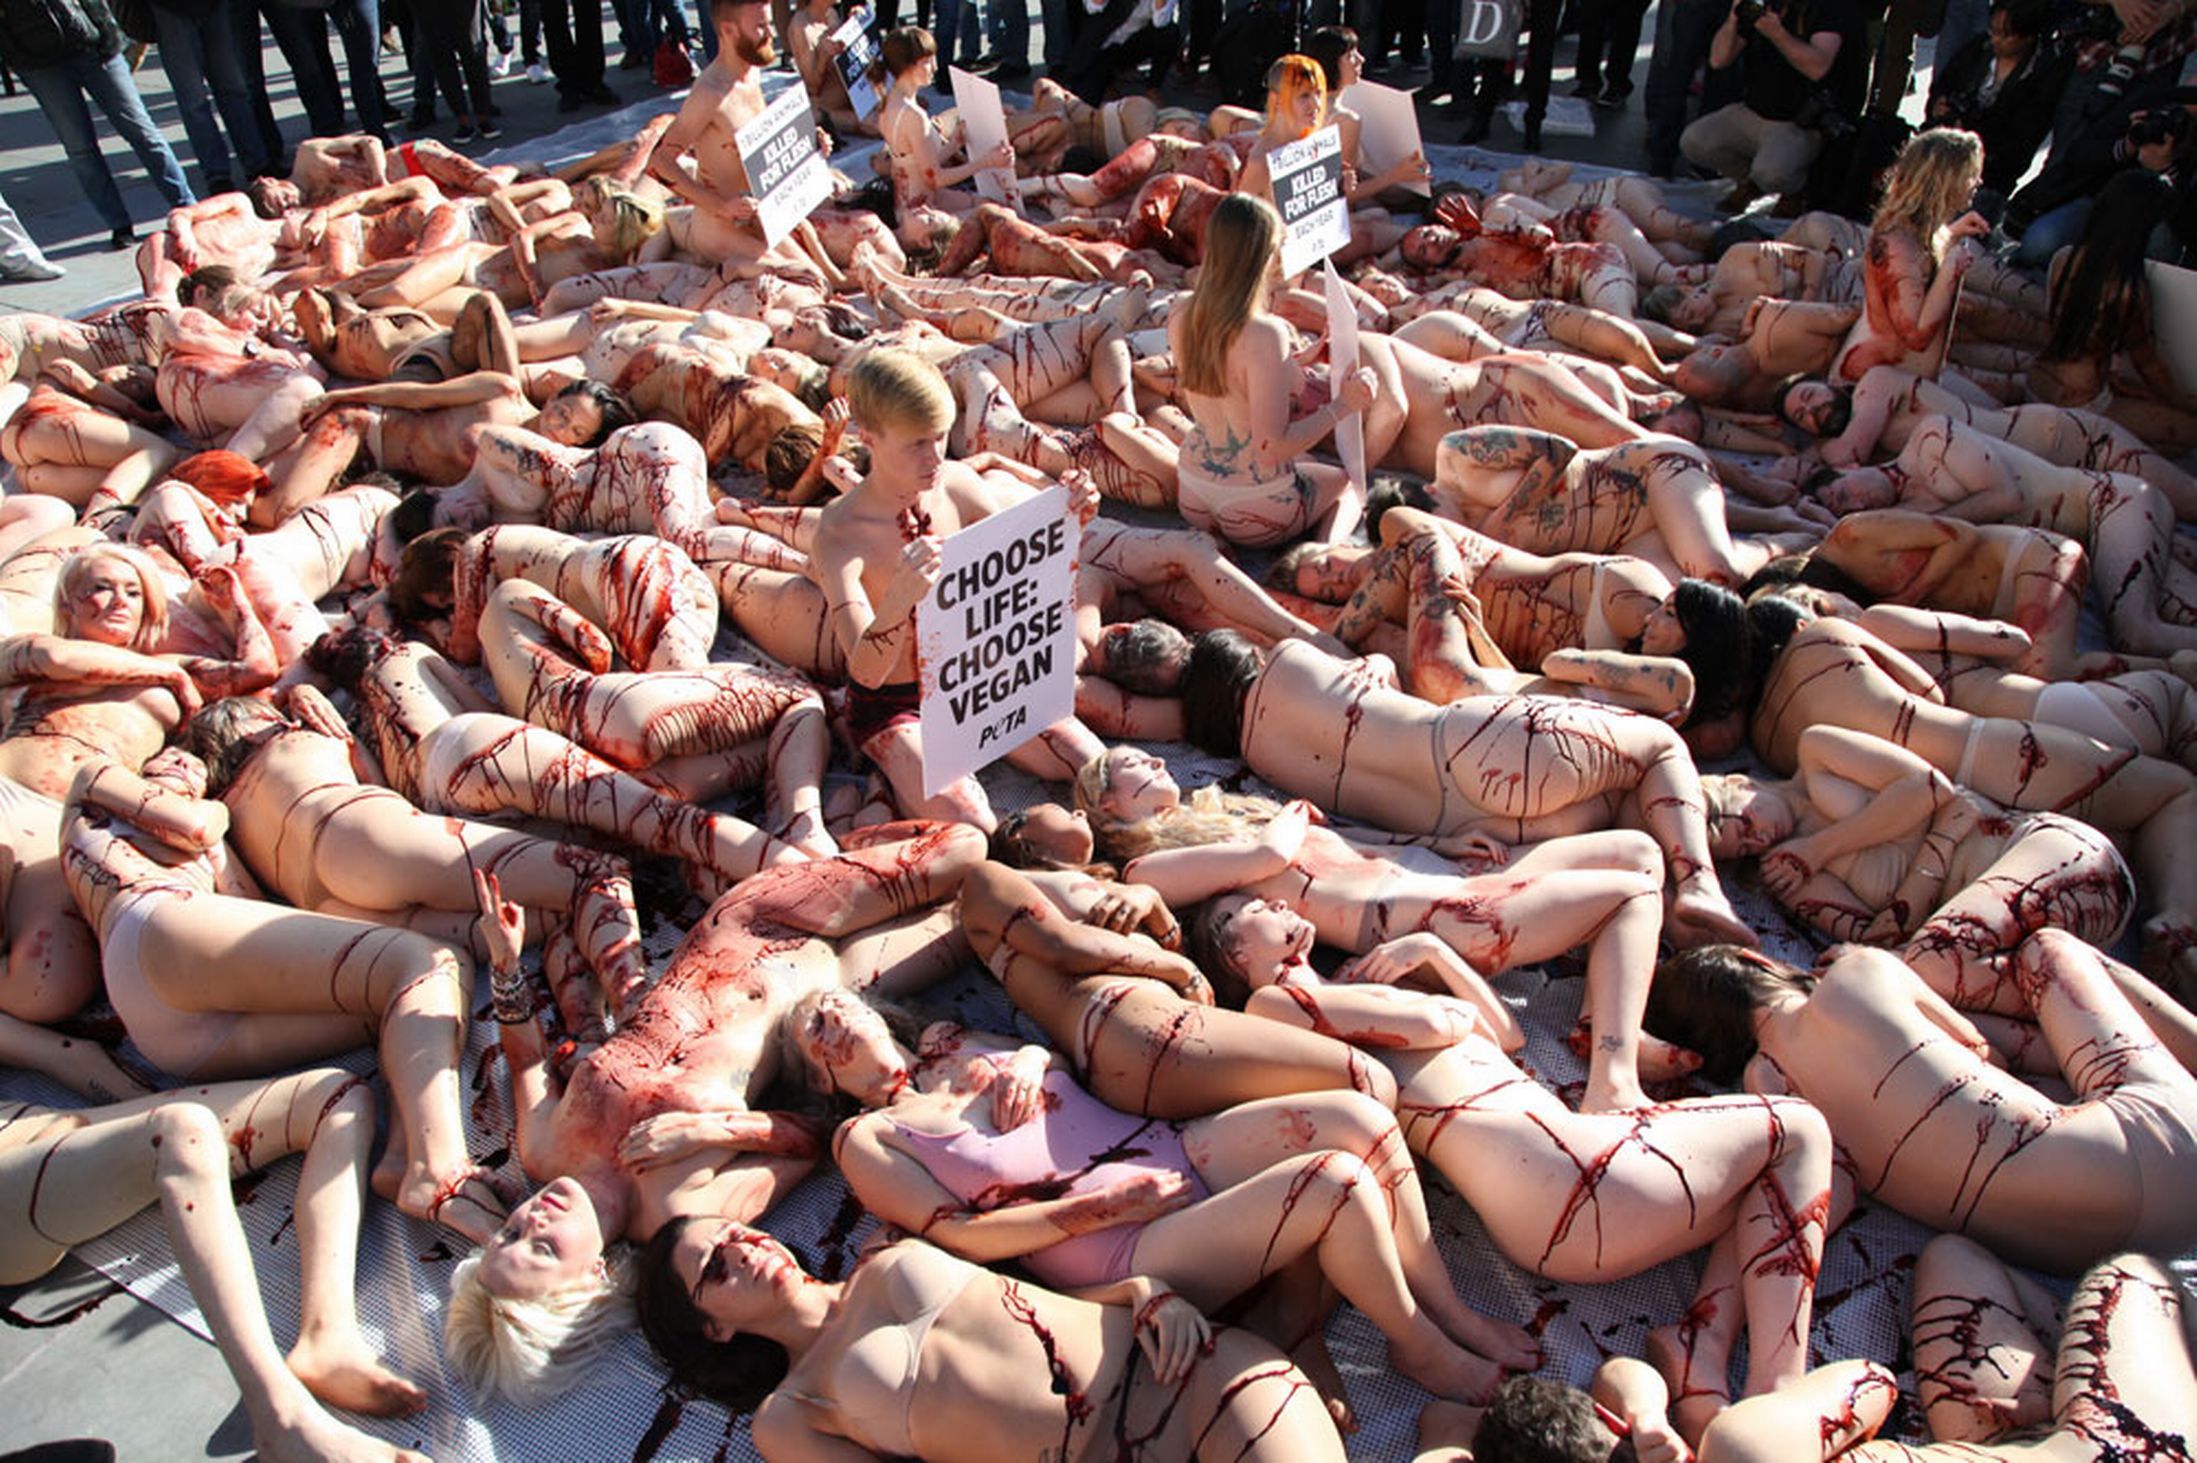 Body naked part protest